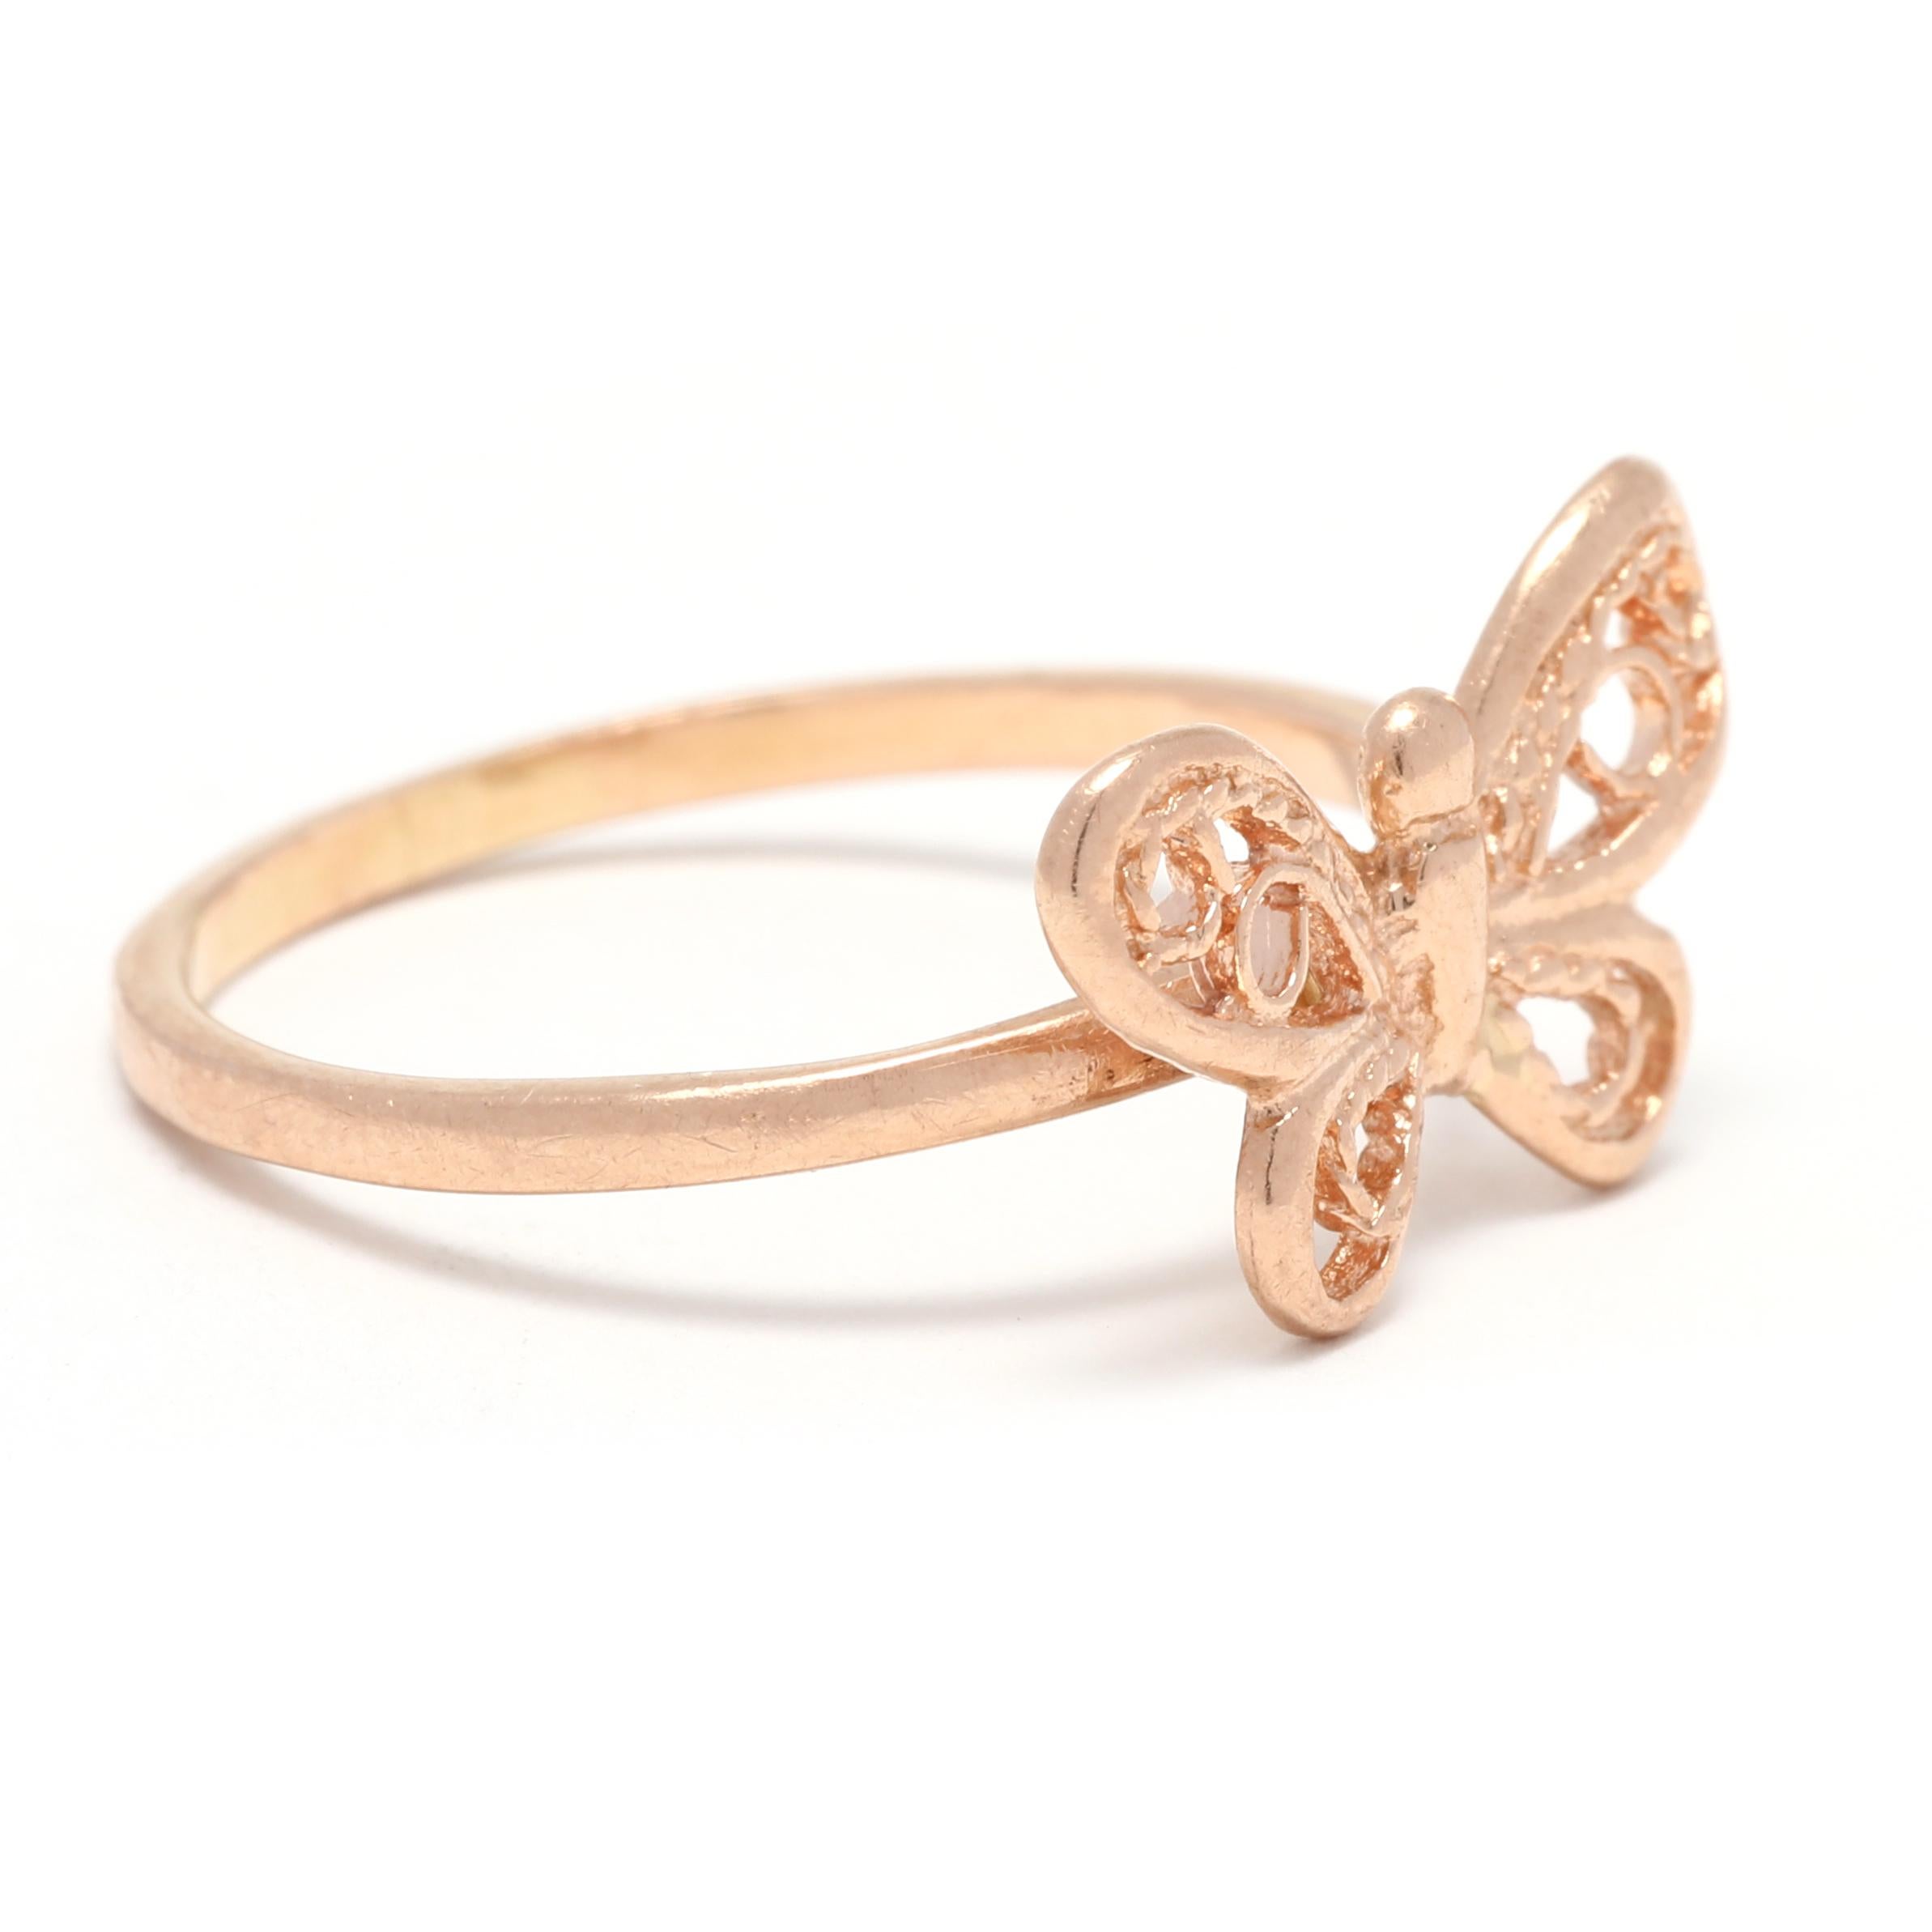 This beautiful everyday butterfly filigree ring is the perfect addition to any jewelry collection. Handcrafted from 14K Rose Gold, this one-of-a-kind ring features an intricate filigree butterfly design that is sure to add a touch of elegance and